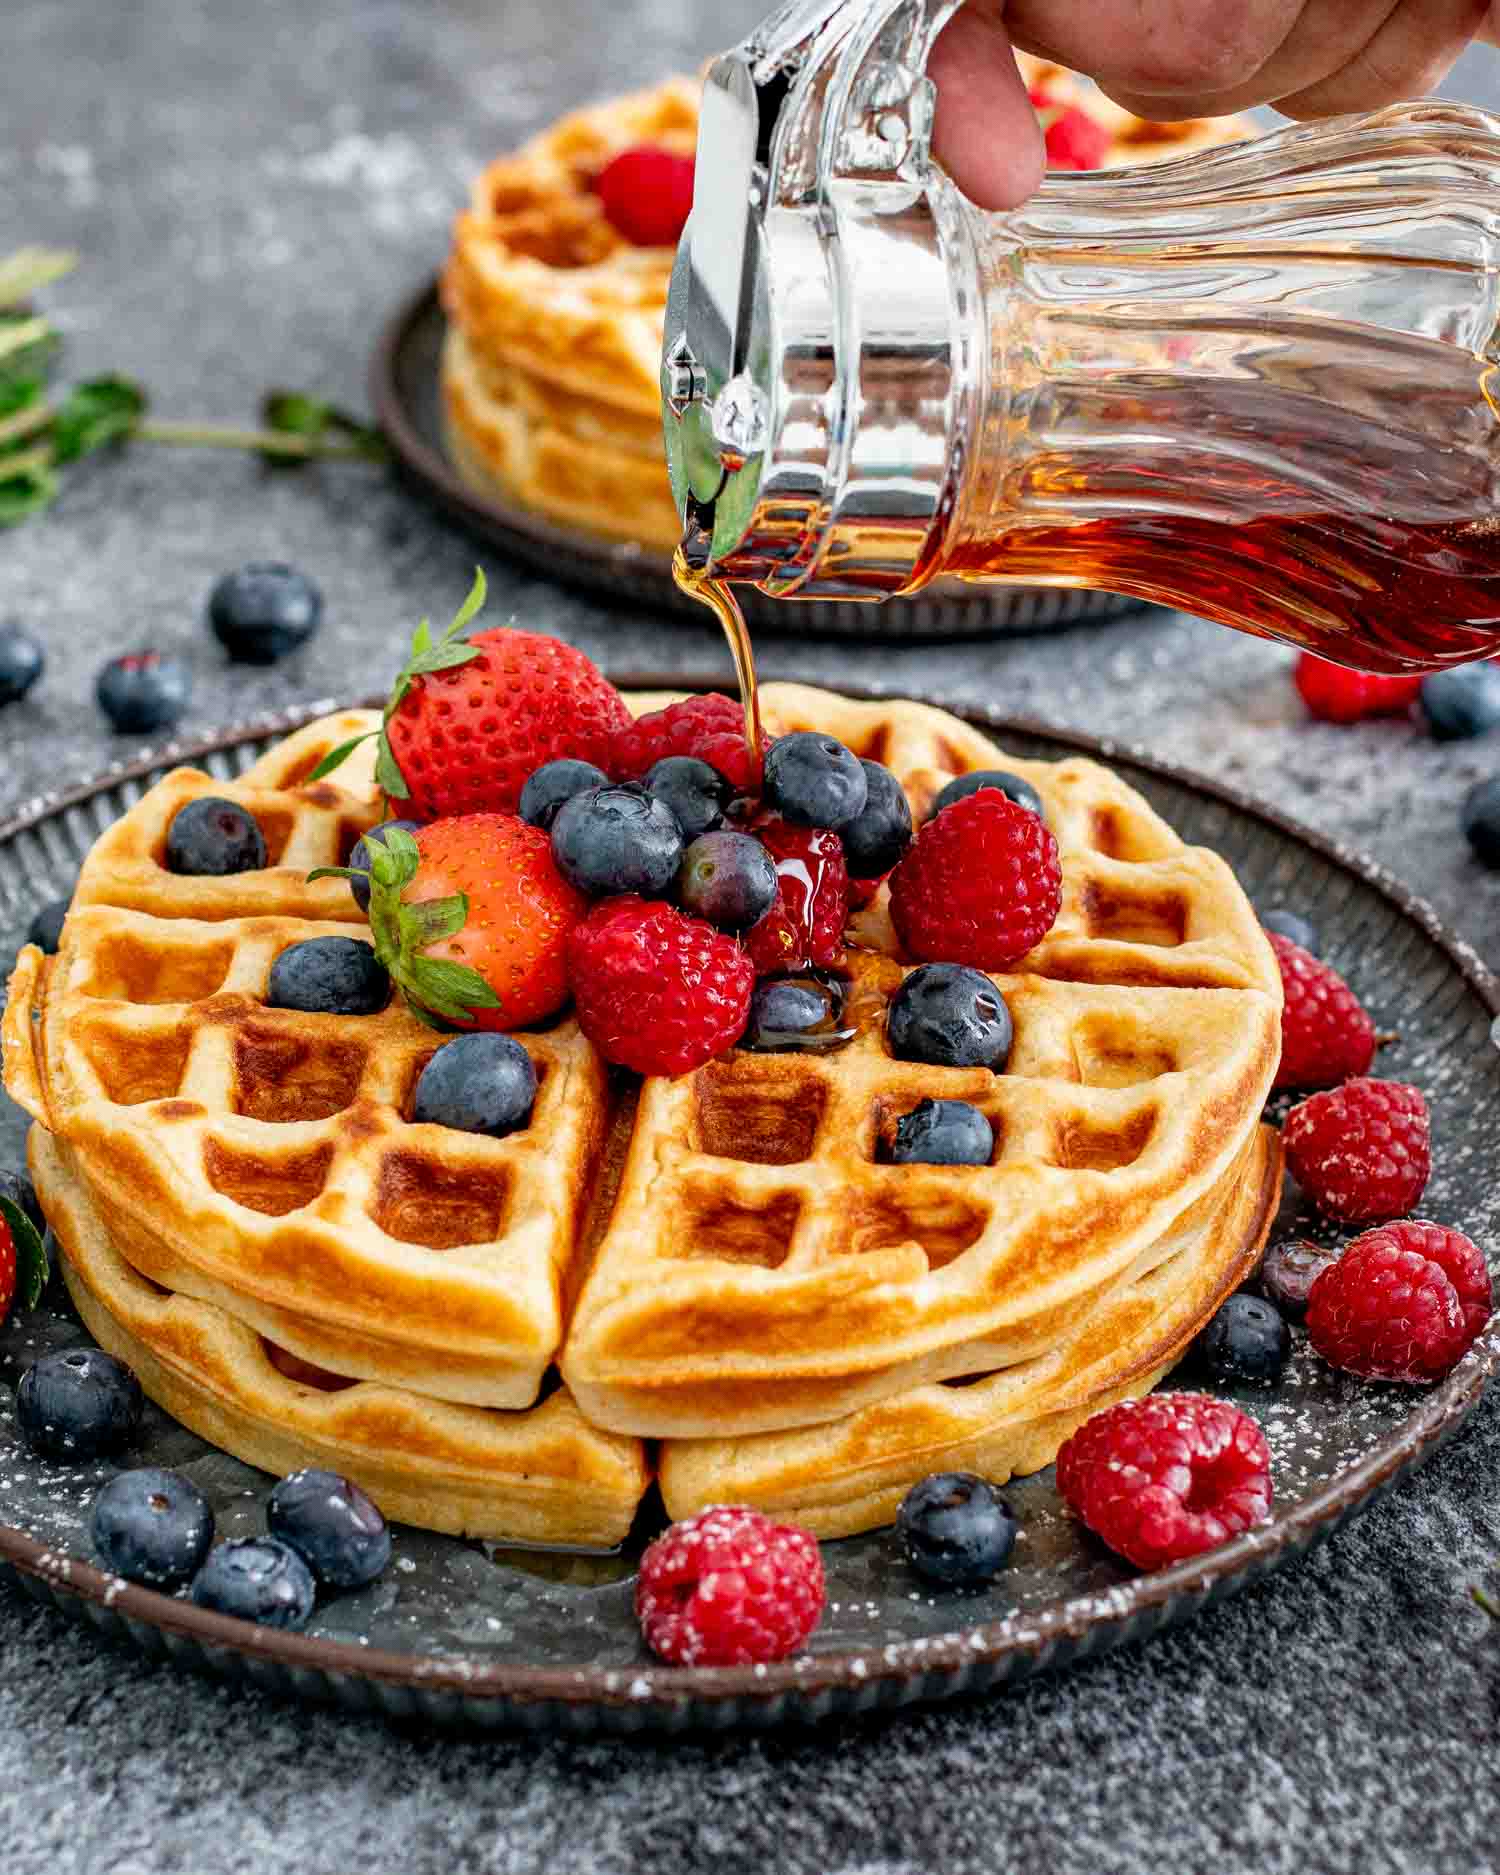 Easy Waffle Recipe - Craving Home Cooked